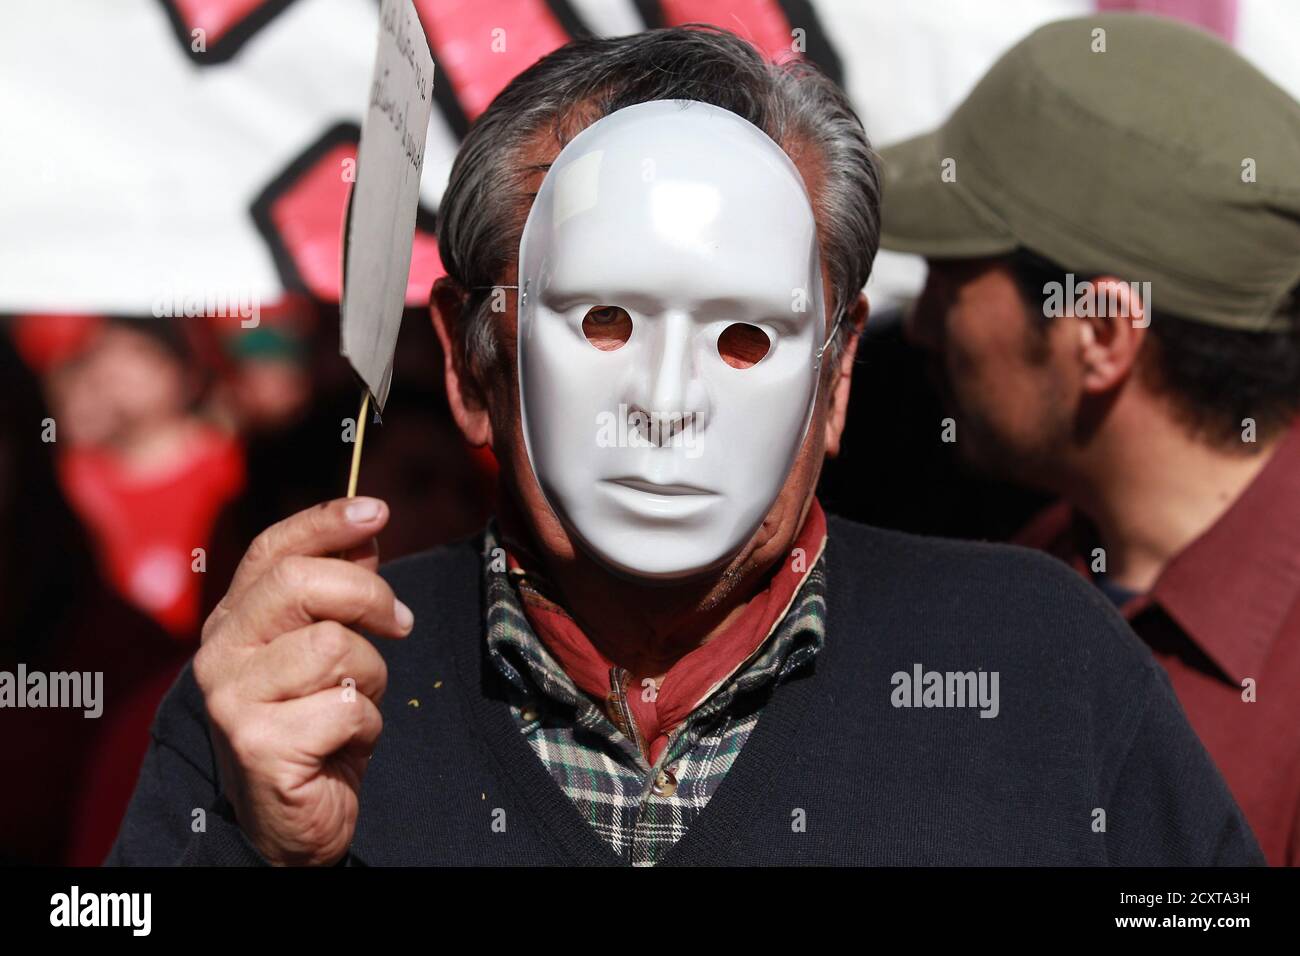 A demonstrator wears a mask during a protest marking the 1973 military coup  in Santiago, September 11, 2011. Sunday marks the 38th anniversary of the  coup d'etat in Chile that ushered in